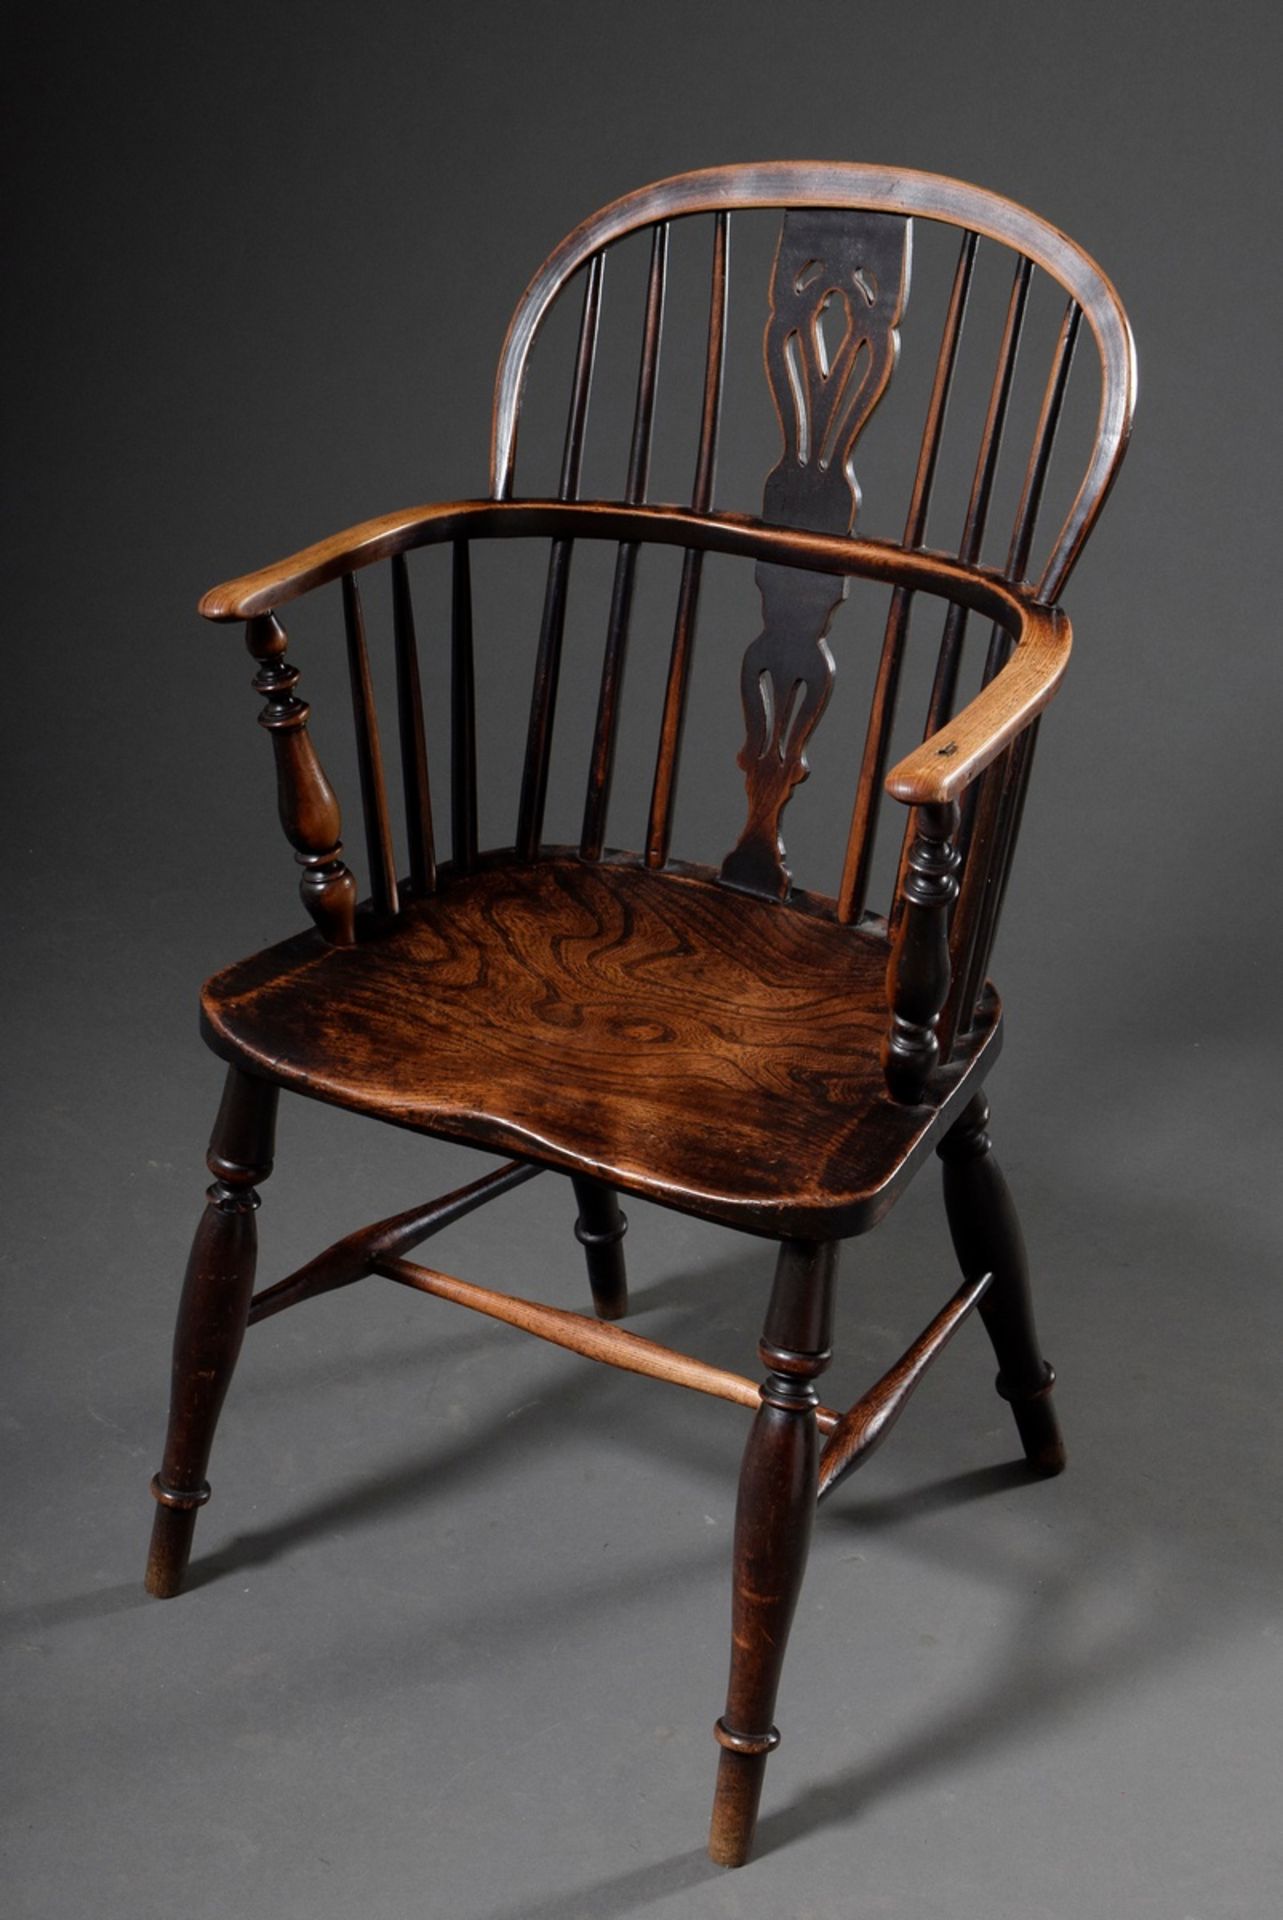 Pair of Windsor Chairs, elm stained, h. 45/89 u. 92, signs of age and use - Image 5 of 6